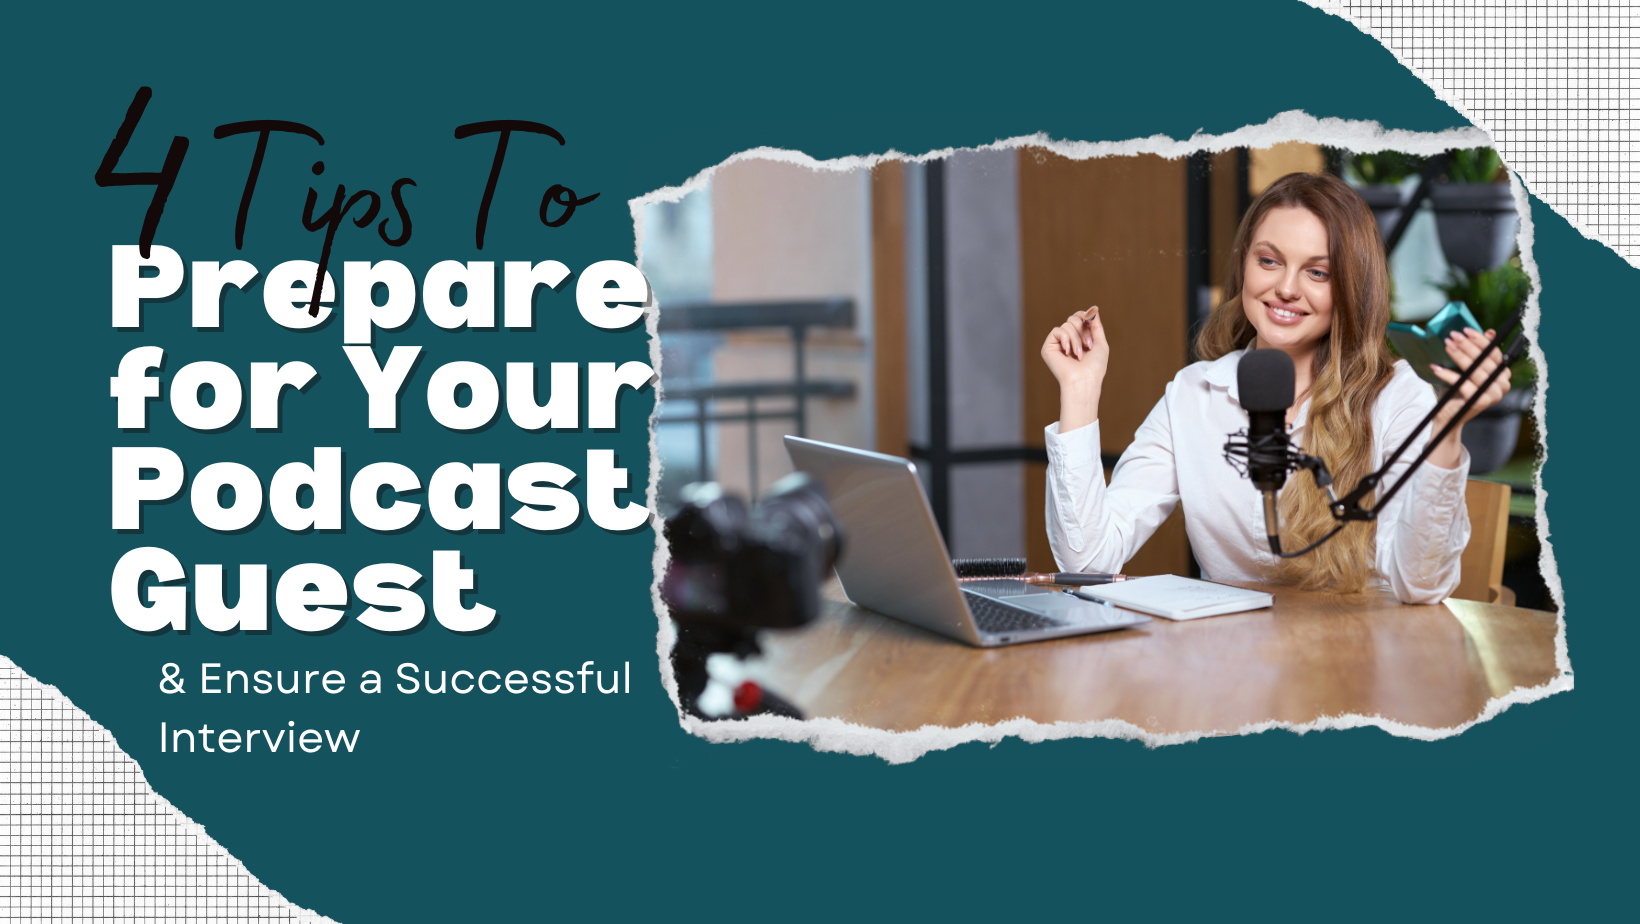 4 Tips to Prepare for Your Podcast Guest and Ensure a Successful Interview